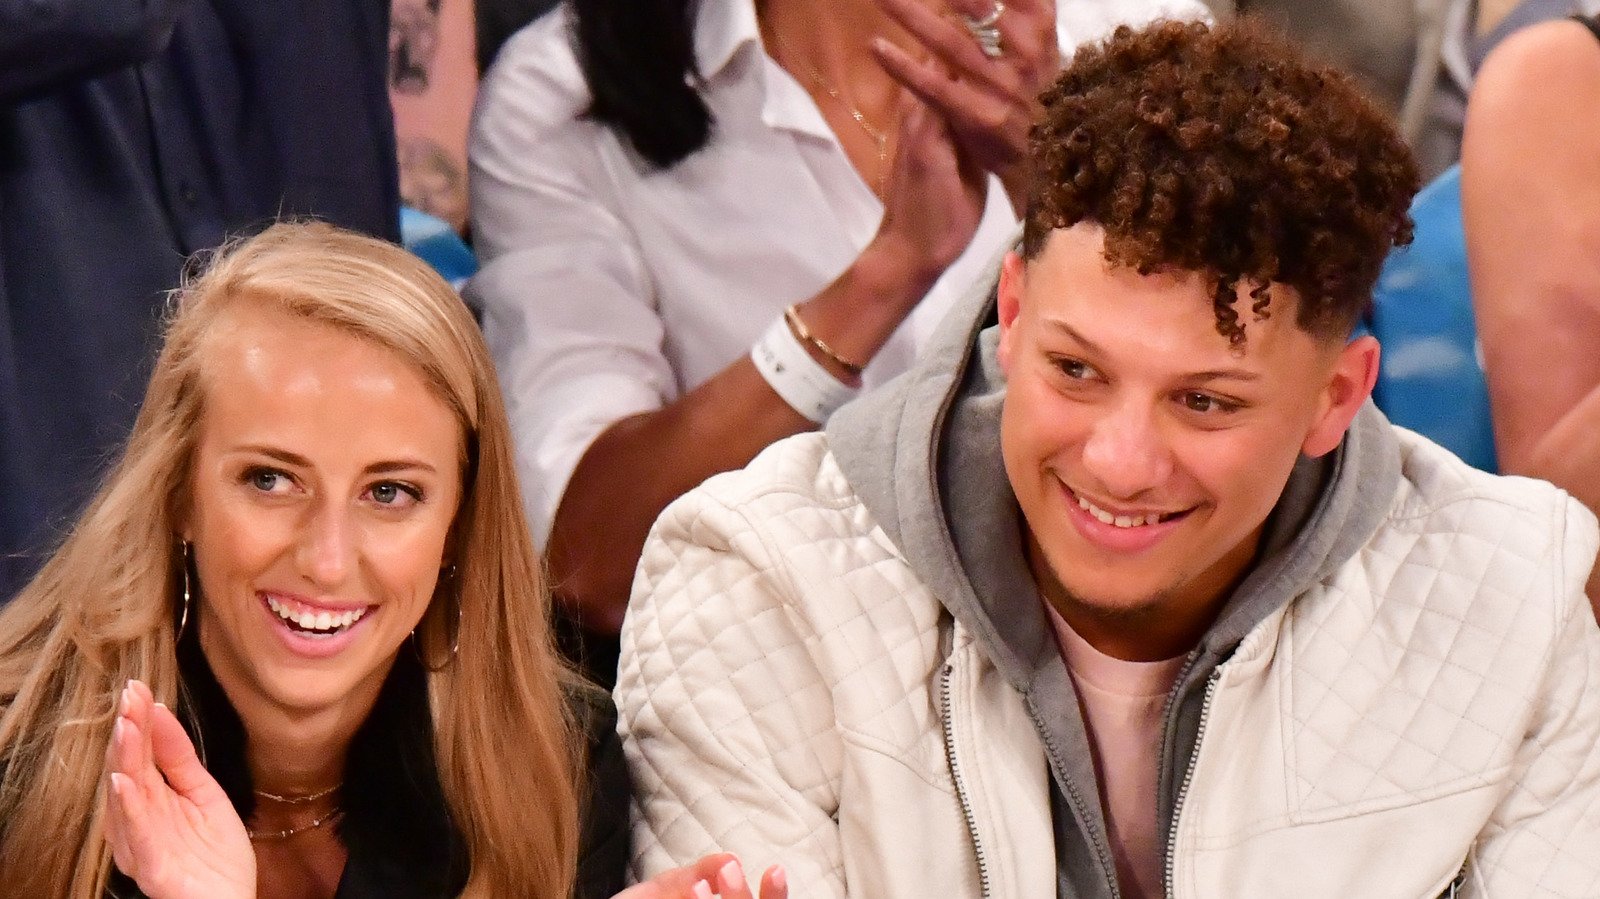 Patrick Mahomes' Fiancée Has Something To Say About His Super Bowl Loss